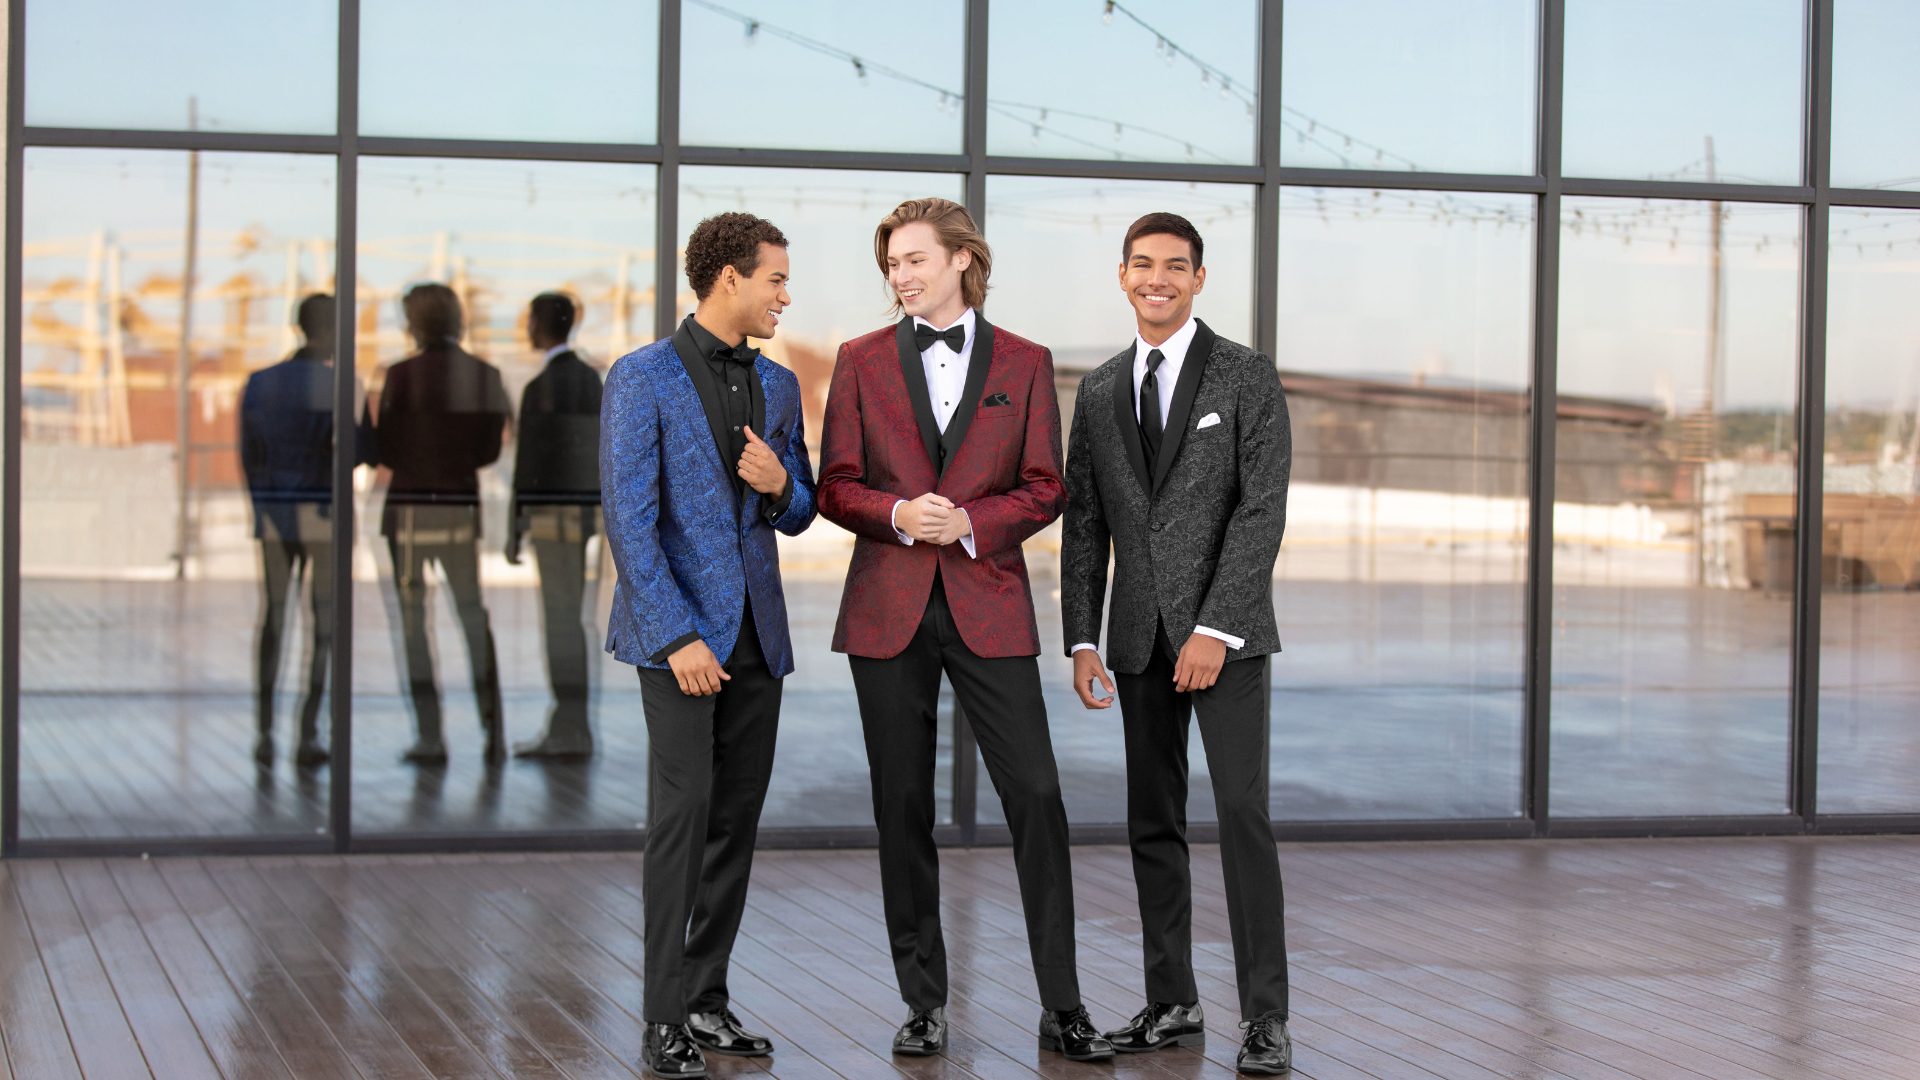 3 high school students outside the dance, ready for the prom, showing off their tuxedo and suit rentals